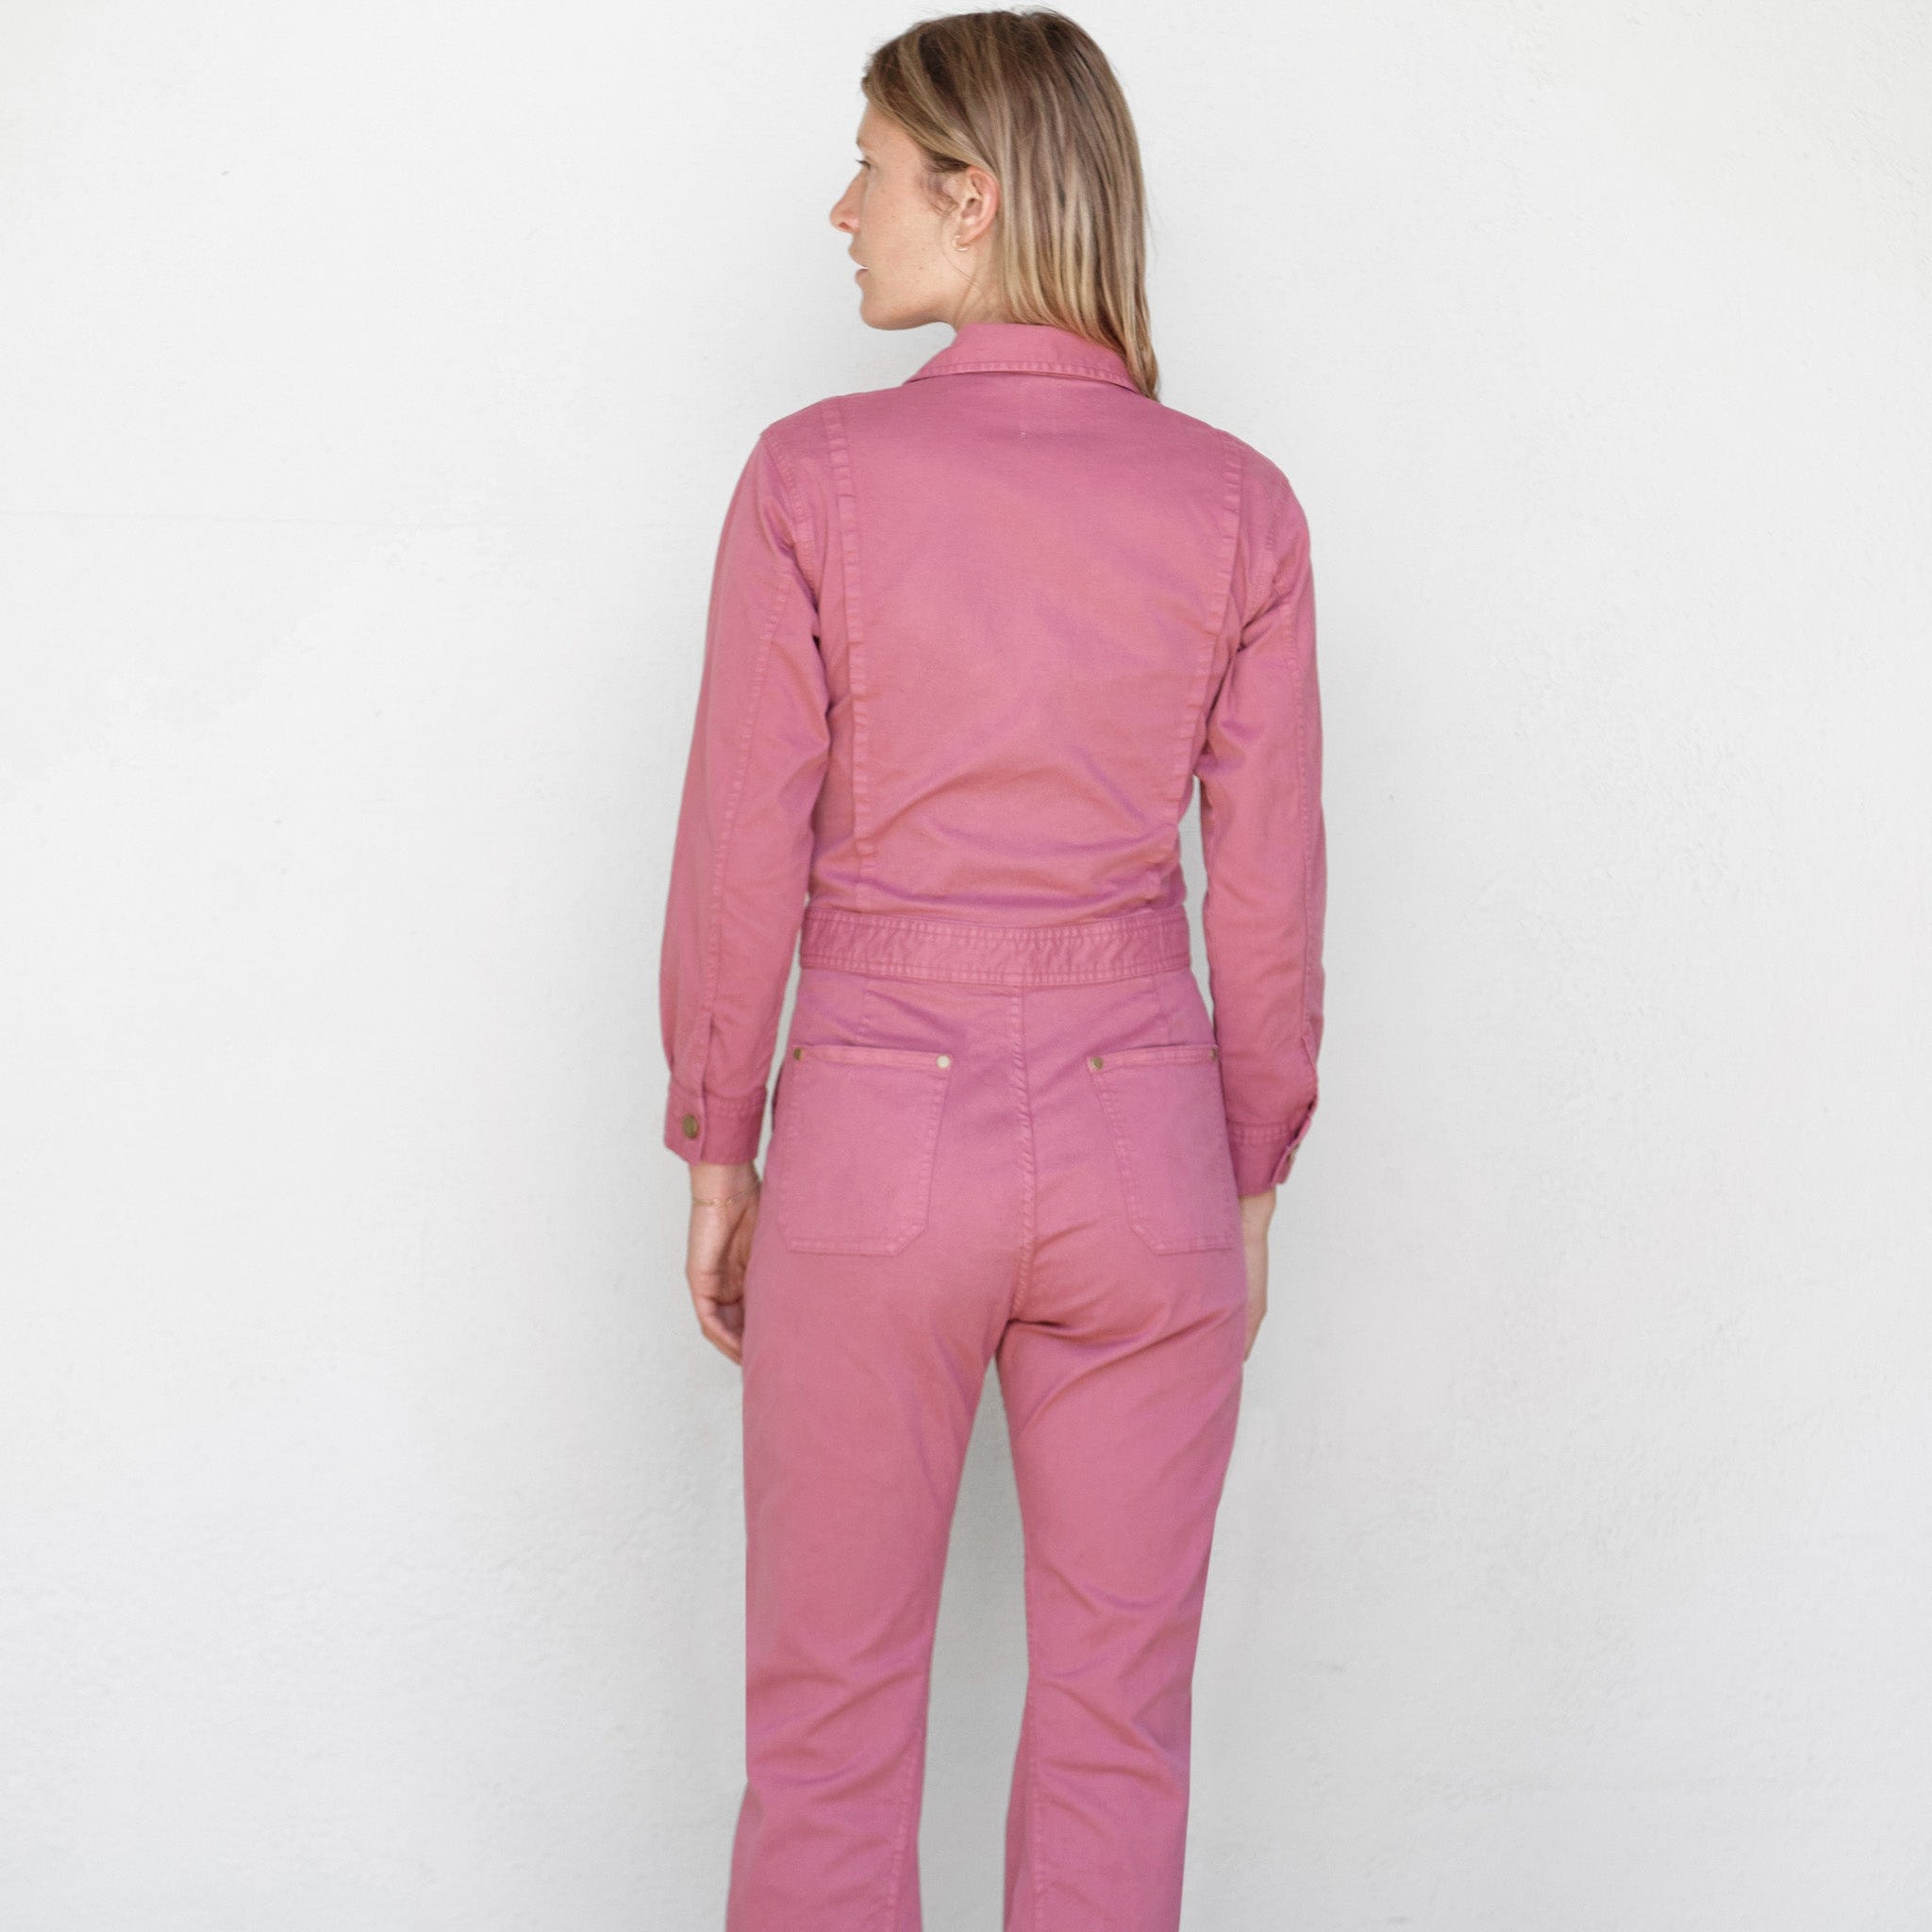 Only Jane Apparel The Only Jane Jumpsuit